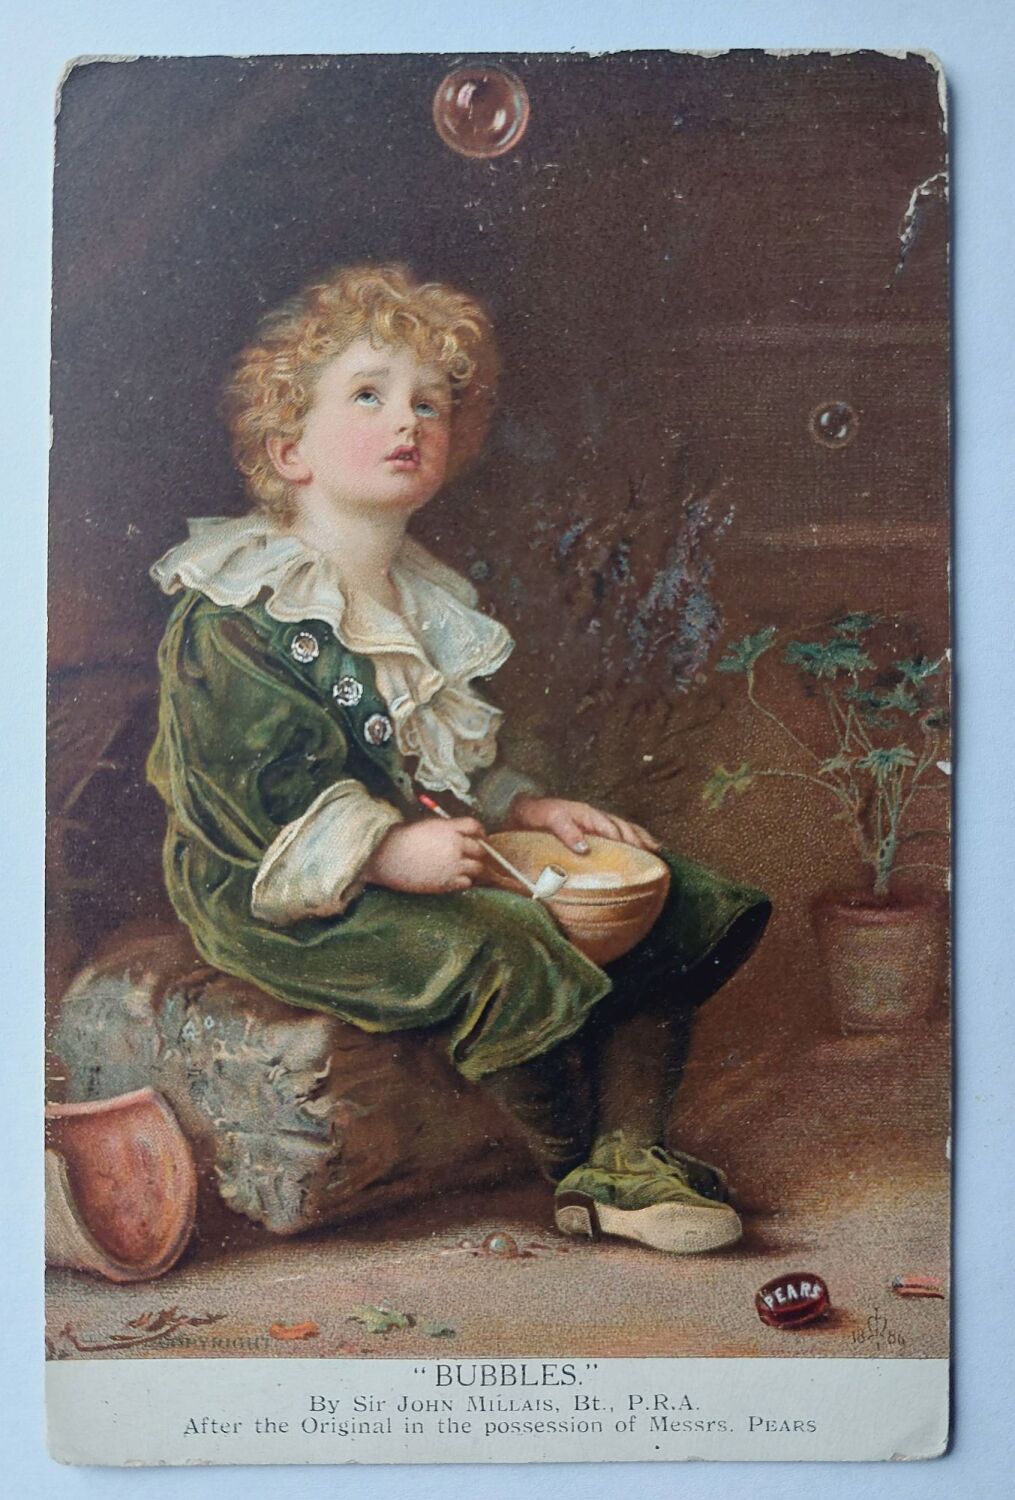 Bubbles-Painting By Sir John Millais-Pears Soap Advertising Art Postcard